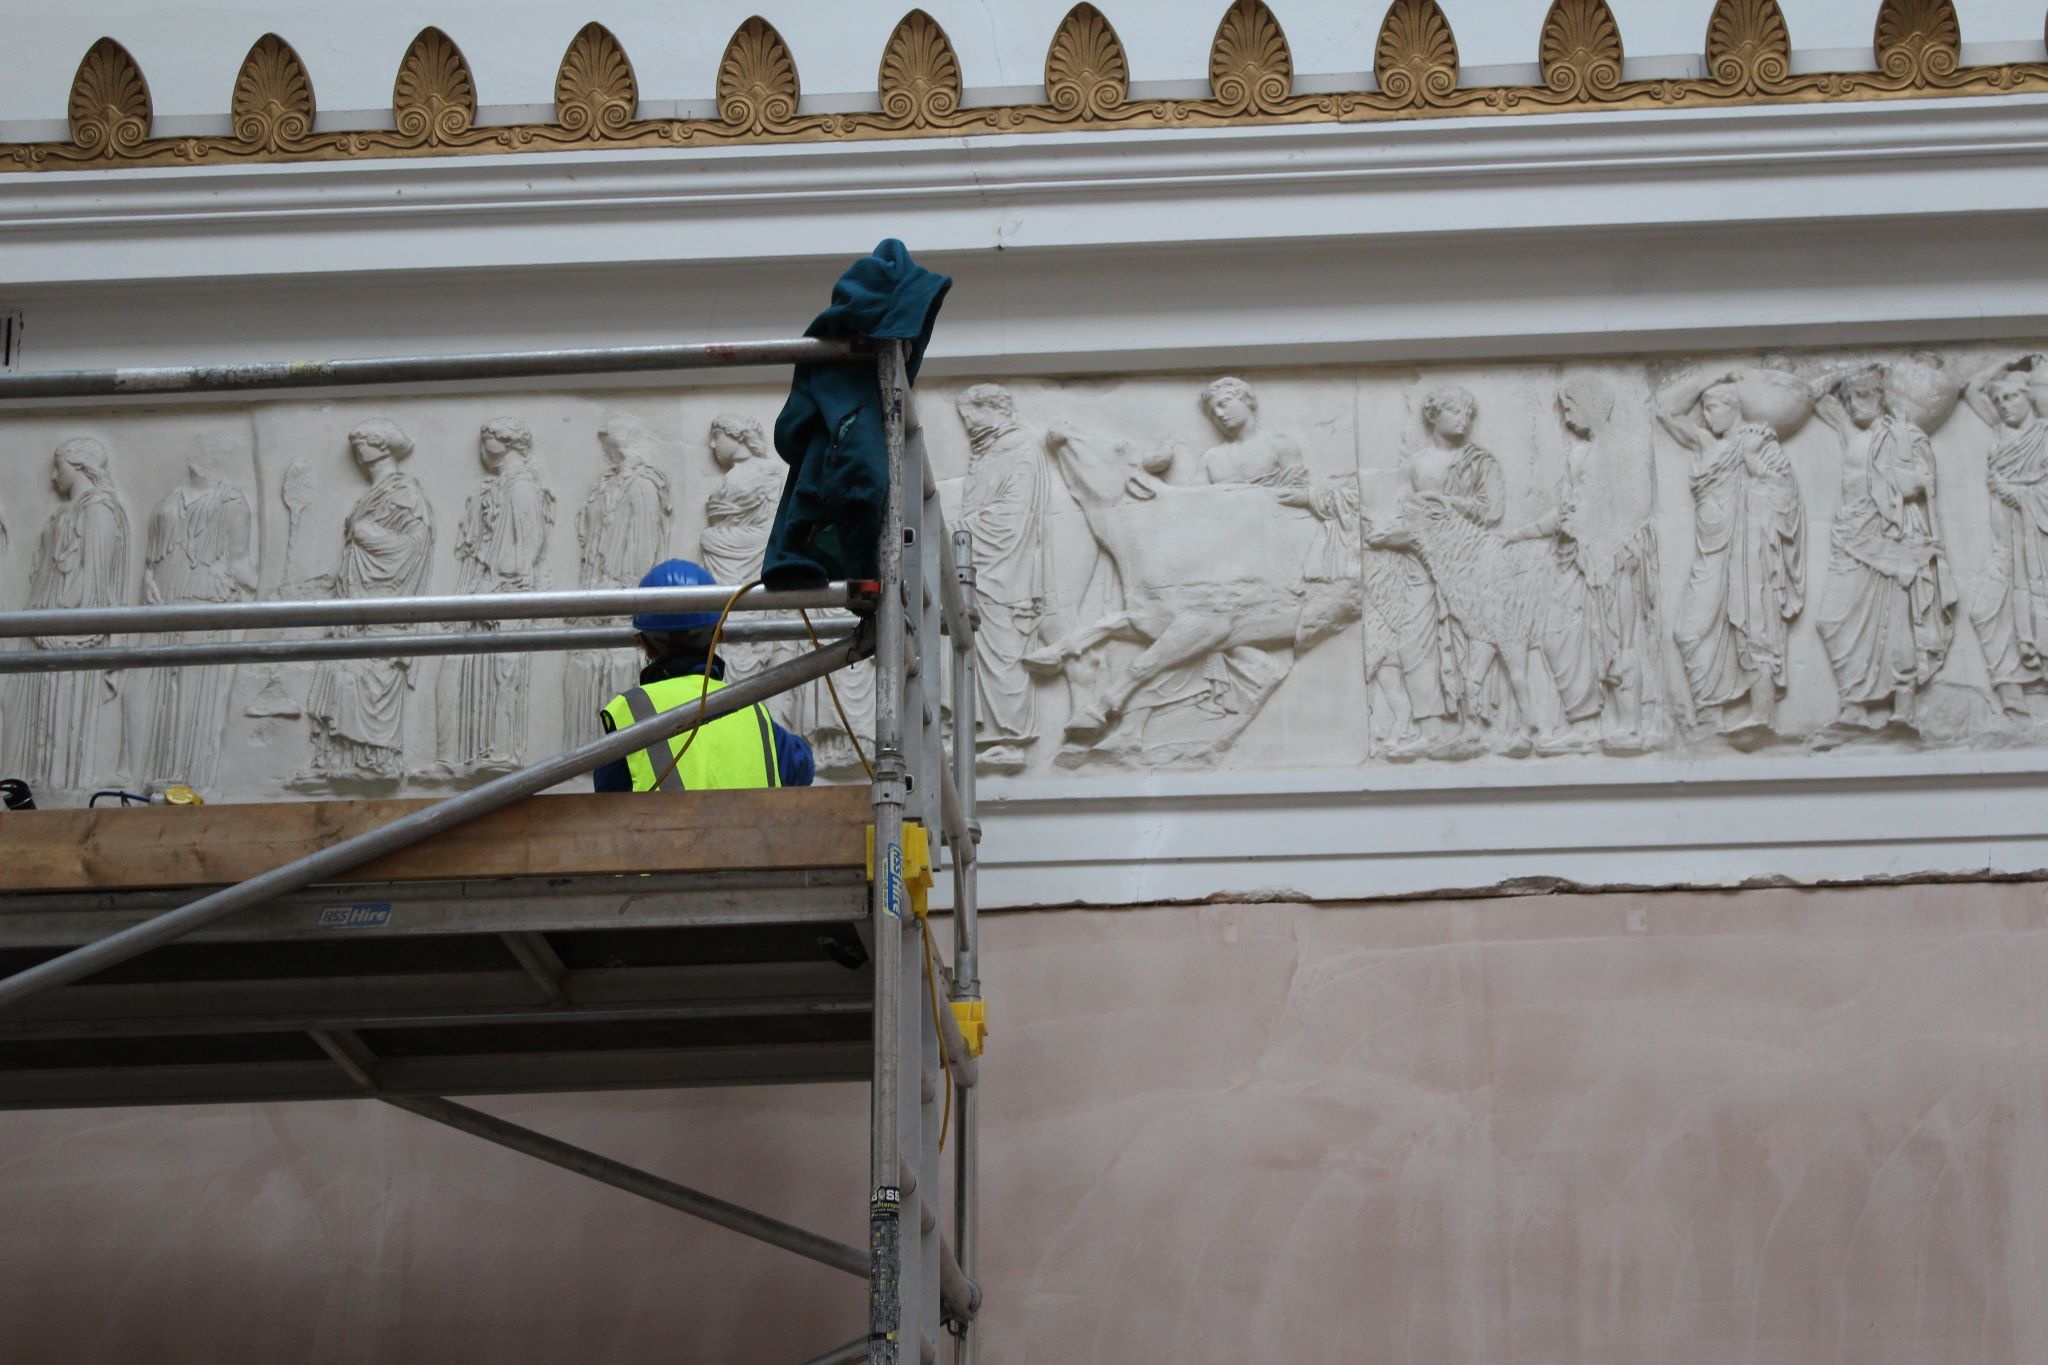 A person in a high vis jacket is on scaffolding working on the RWA gallery decorative walls 